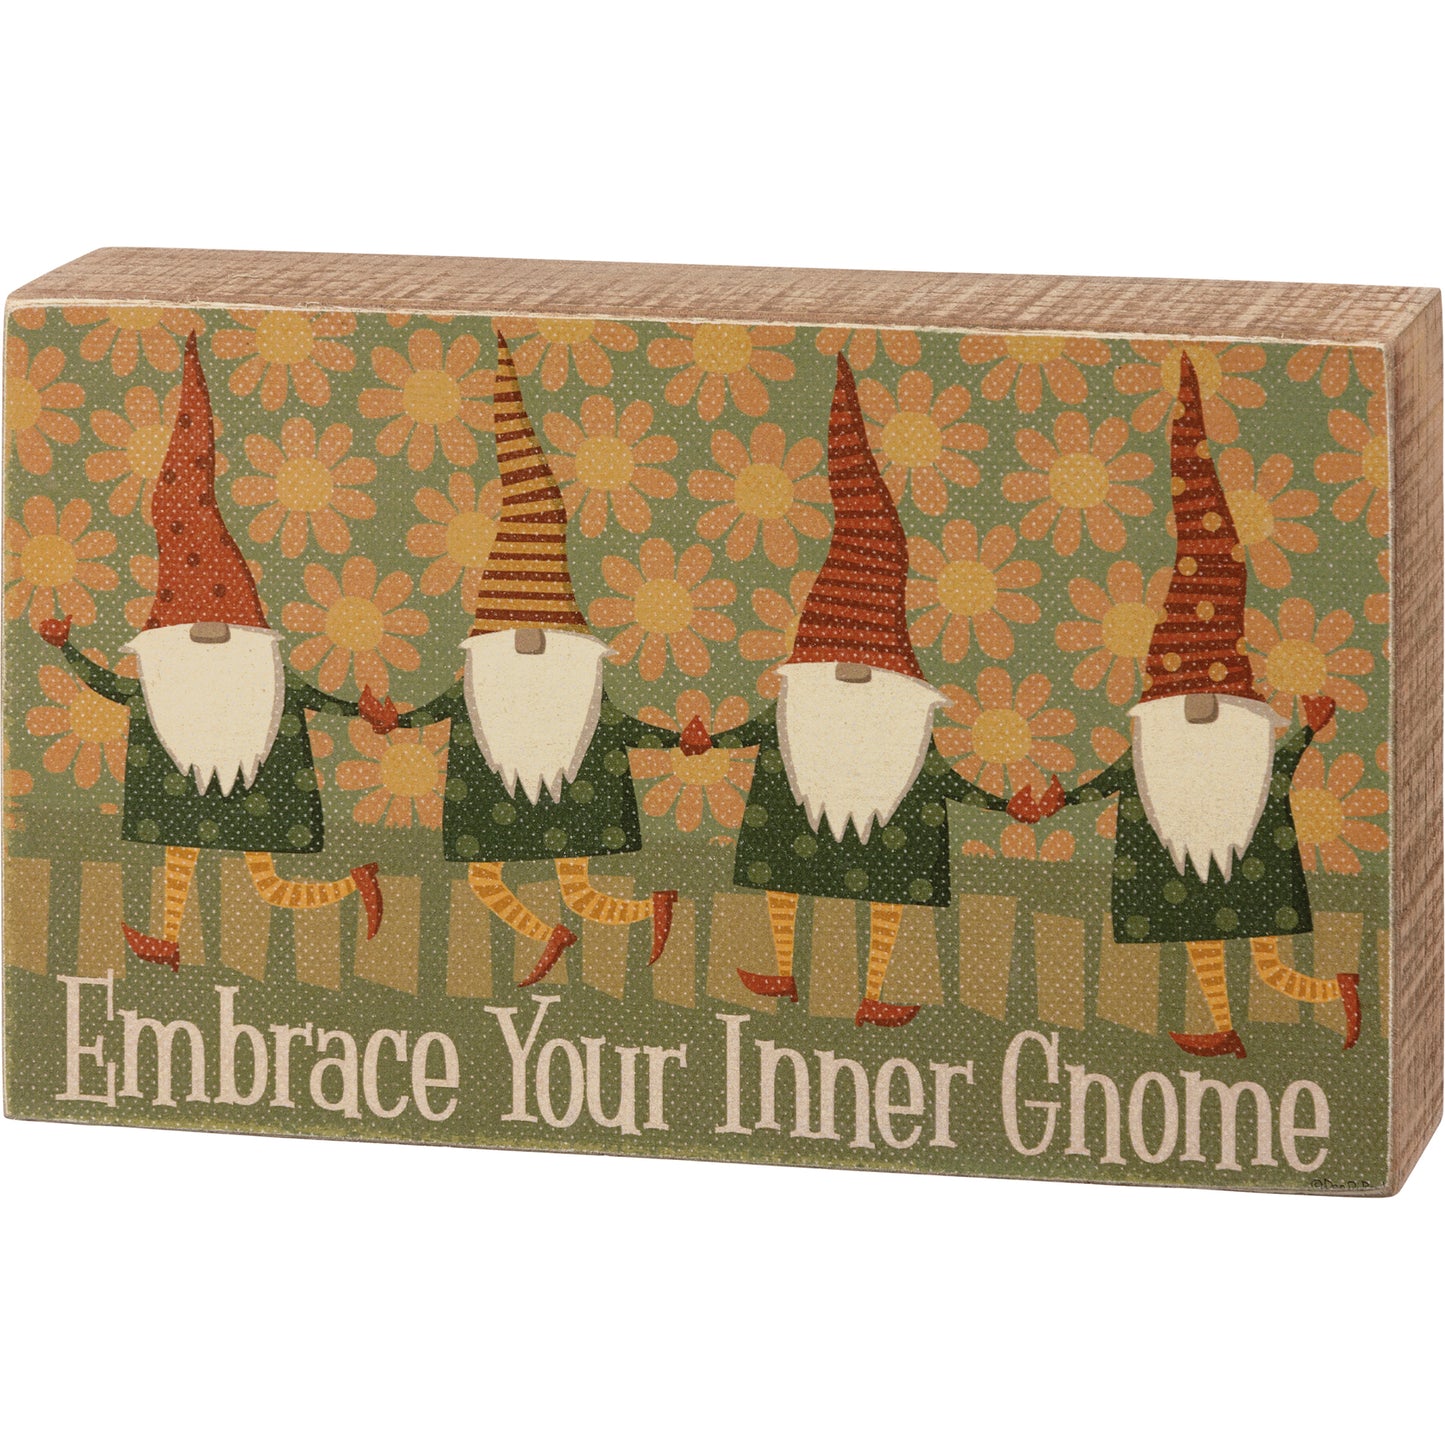 Box Sign - "Embrace Your Inner Gnome"